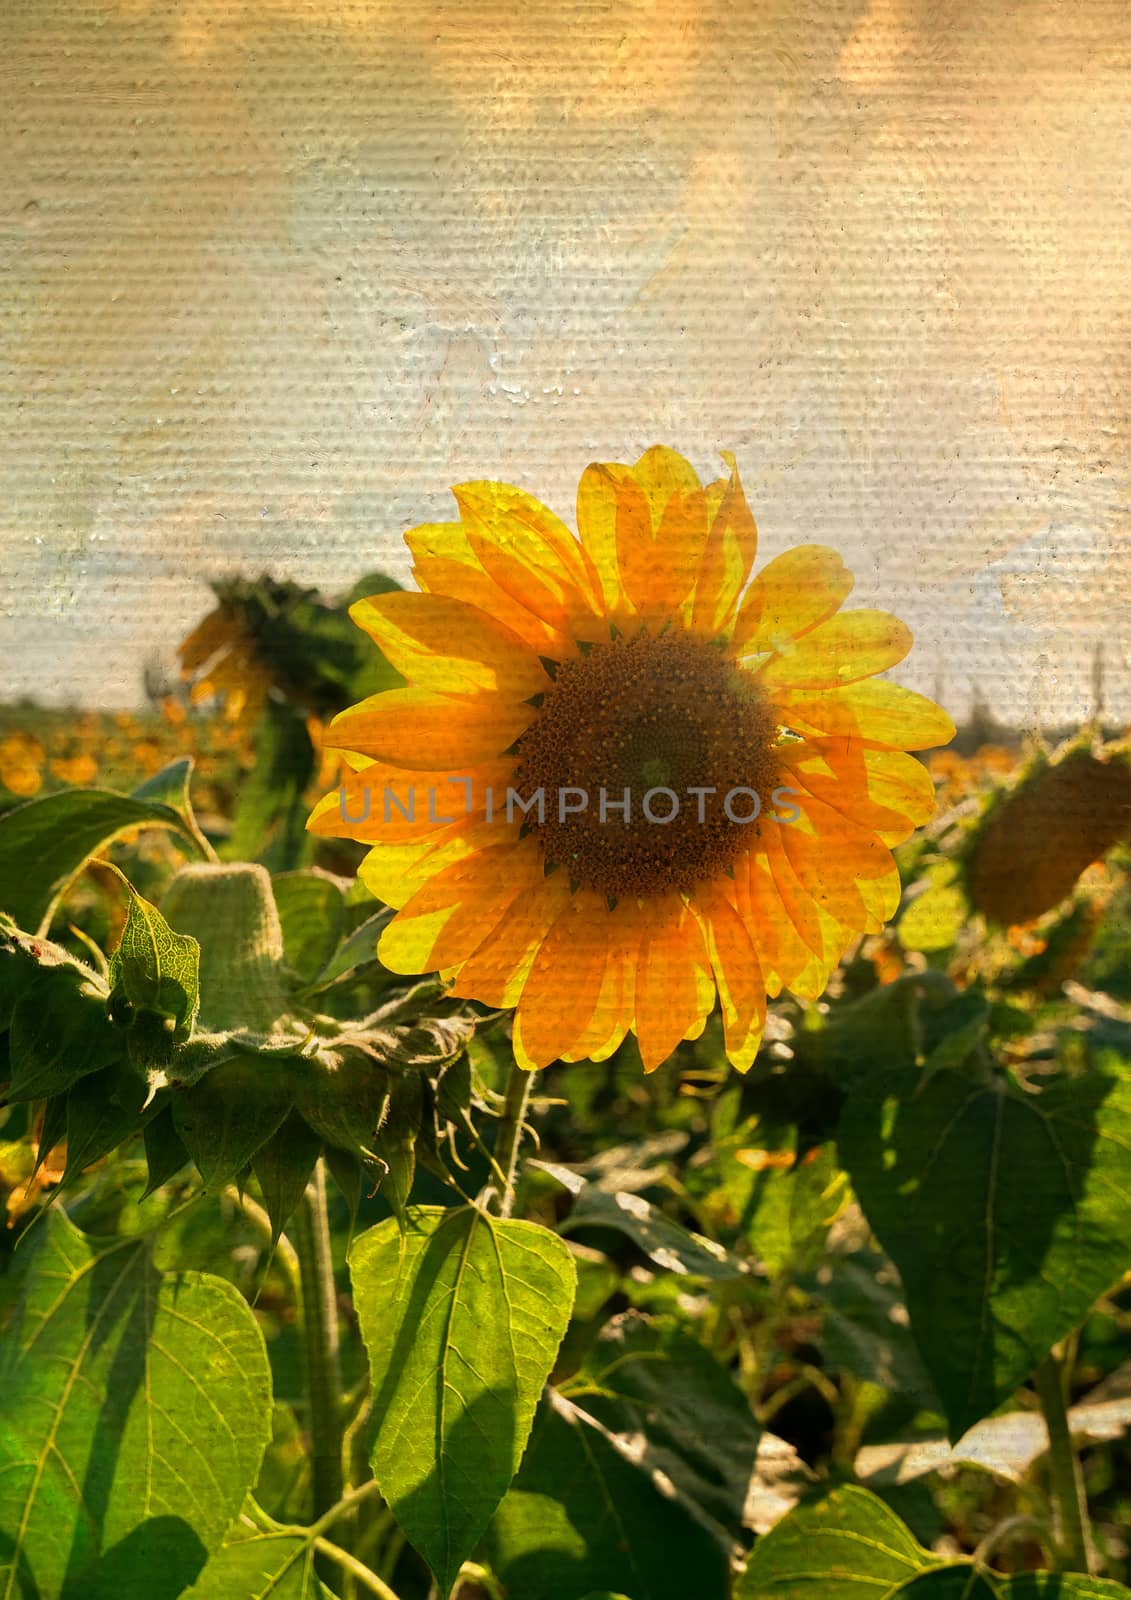 Sunflower on canvas by Givaga